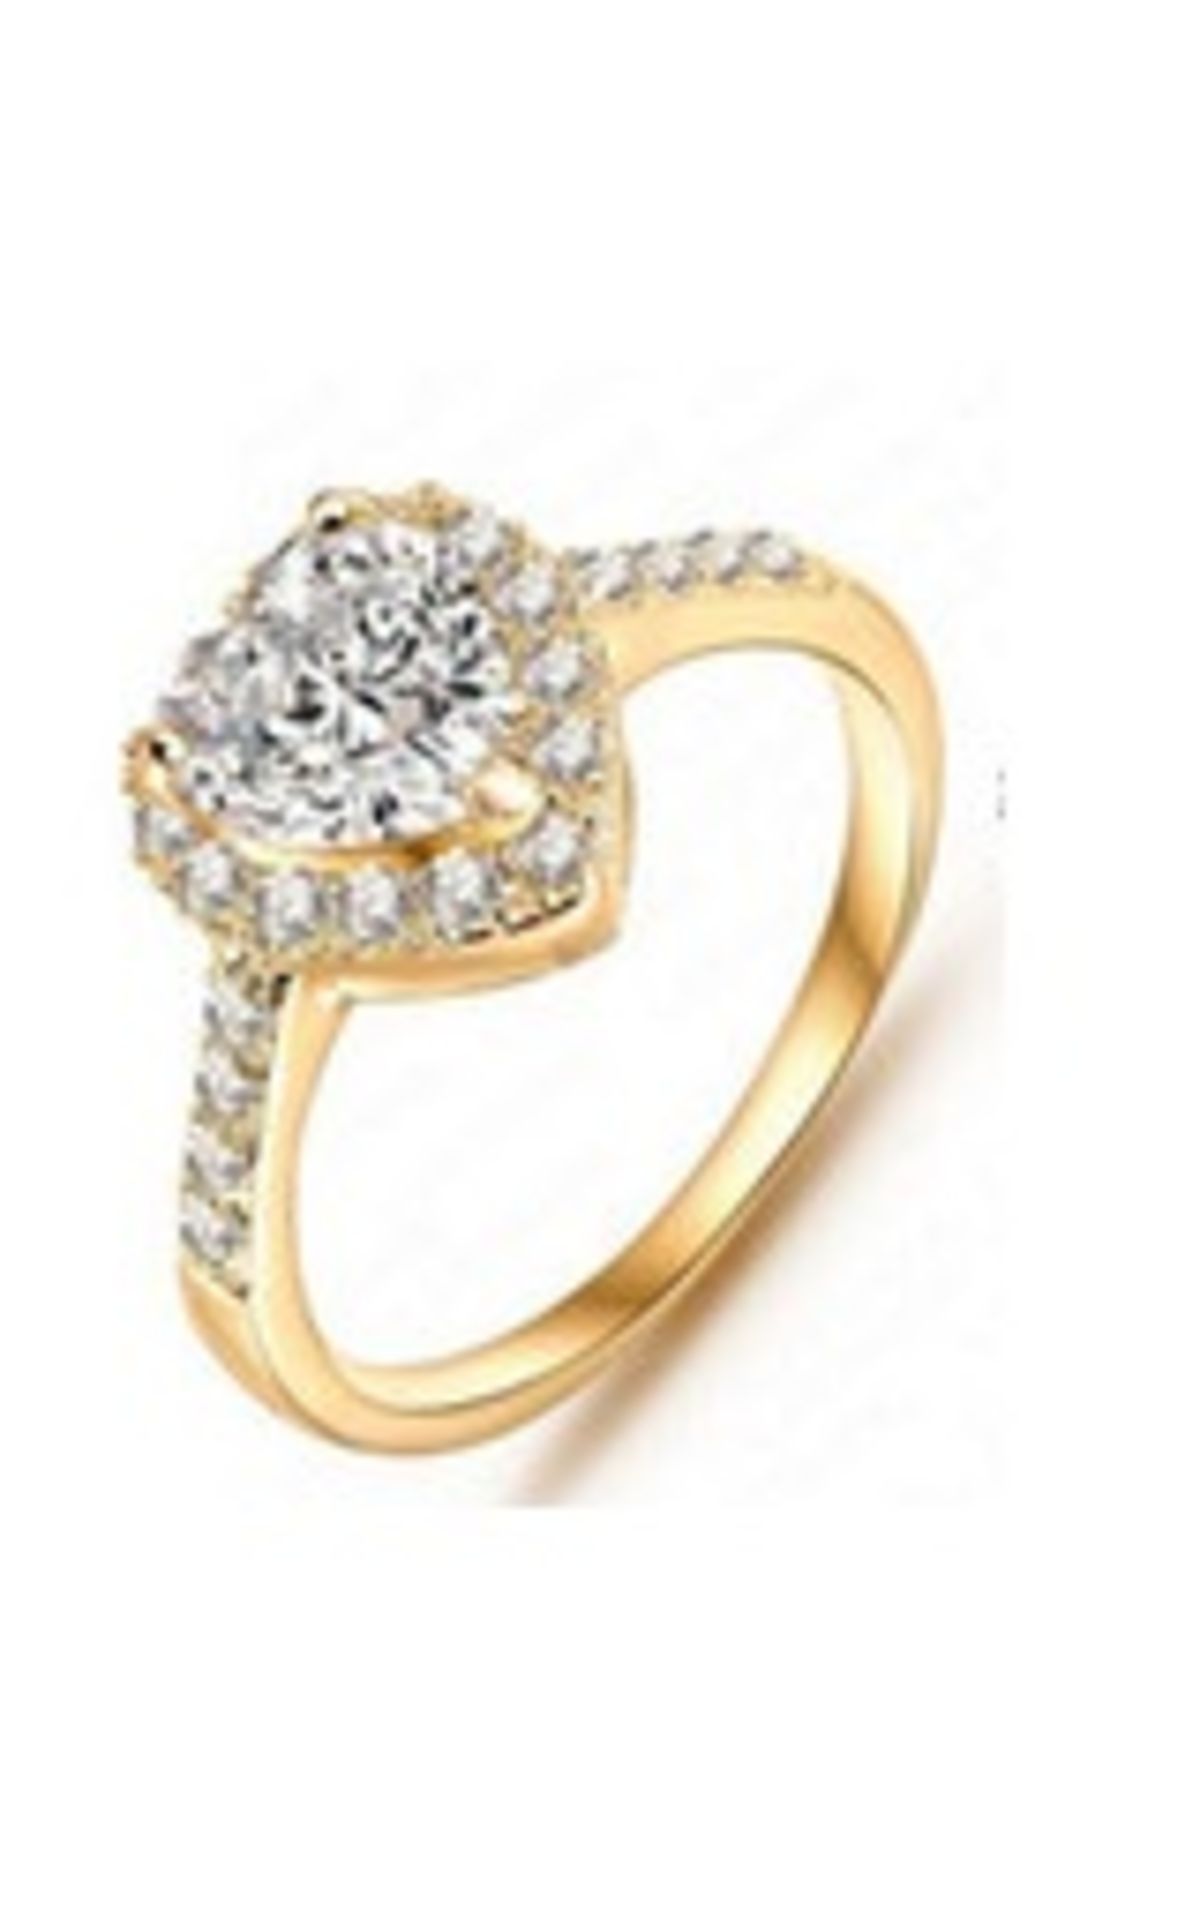 V *TRADE QTY* Brand New Gold Plated Heart Shaped Ring with White Stones X 3 YOUR BID PRICE TO BE